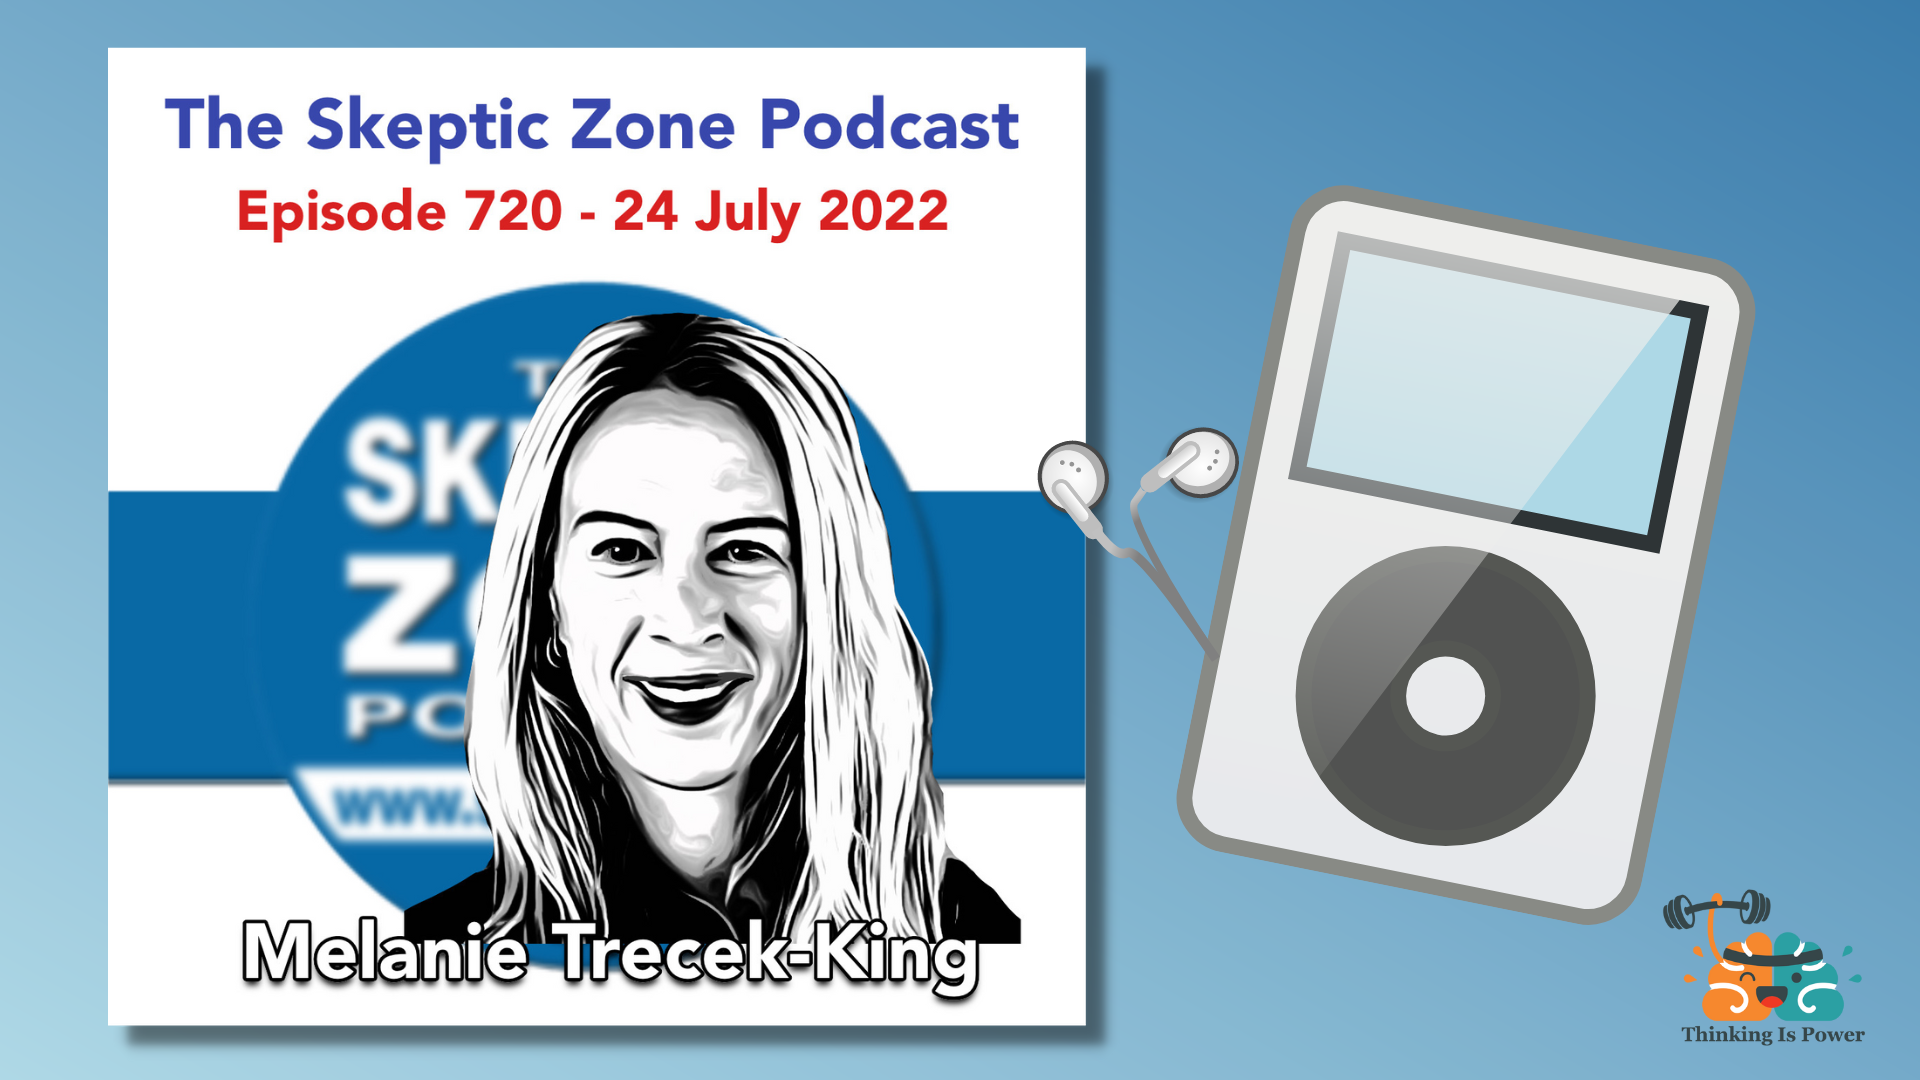 Melanie Trecek-King from Thinking Is Power on The Skeptic Zone Podcast with Richard Saunders discussing critical thinking and science education